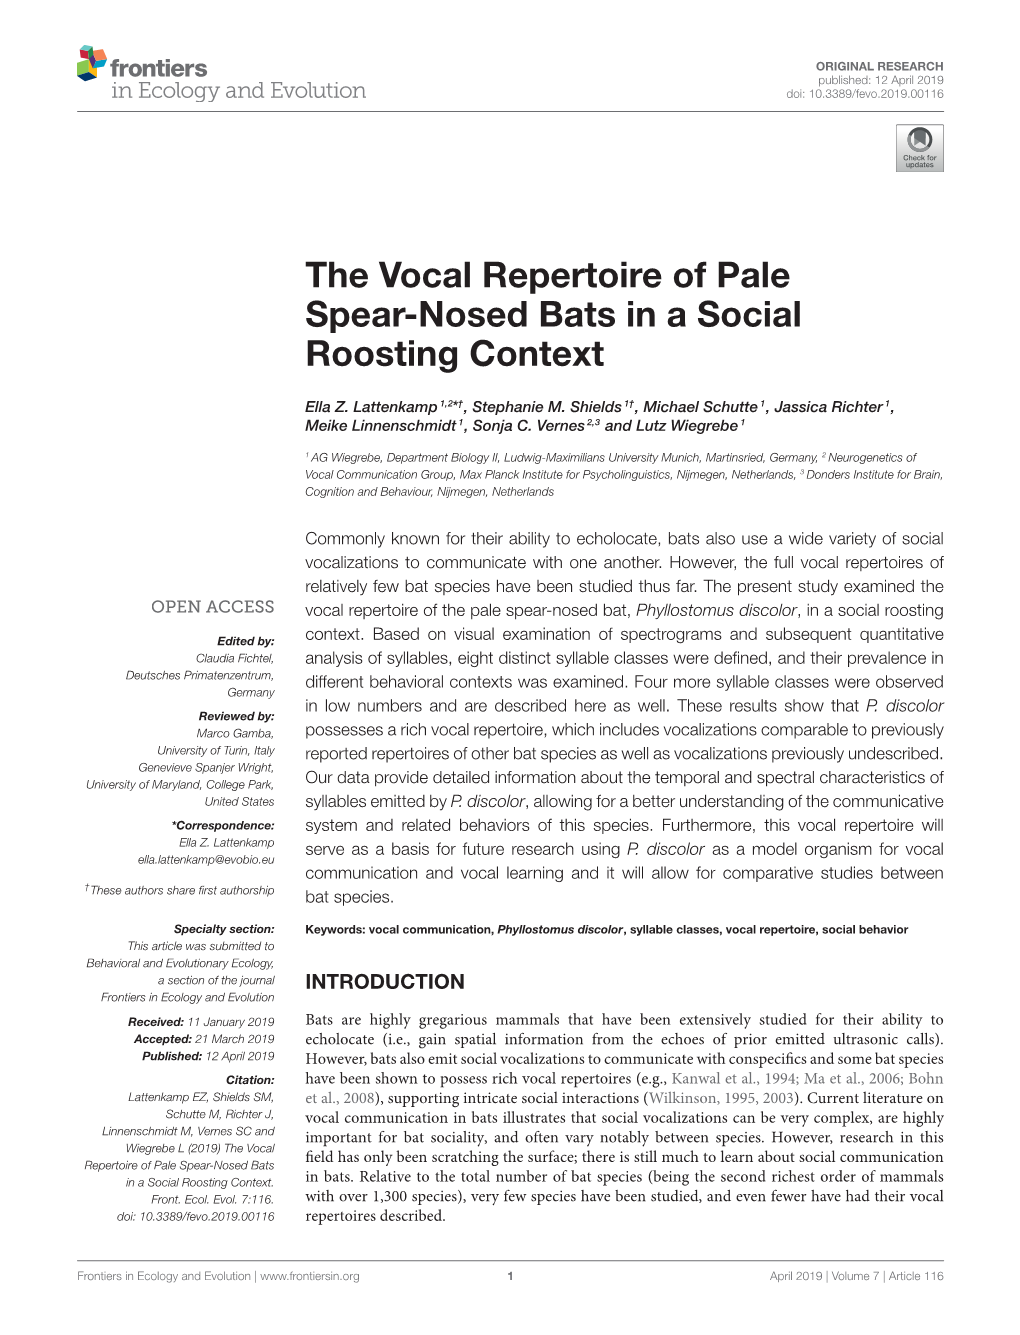 The Vocal Repertoire of Pale Spear-Nosed Bats in a Social Roosting Context